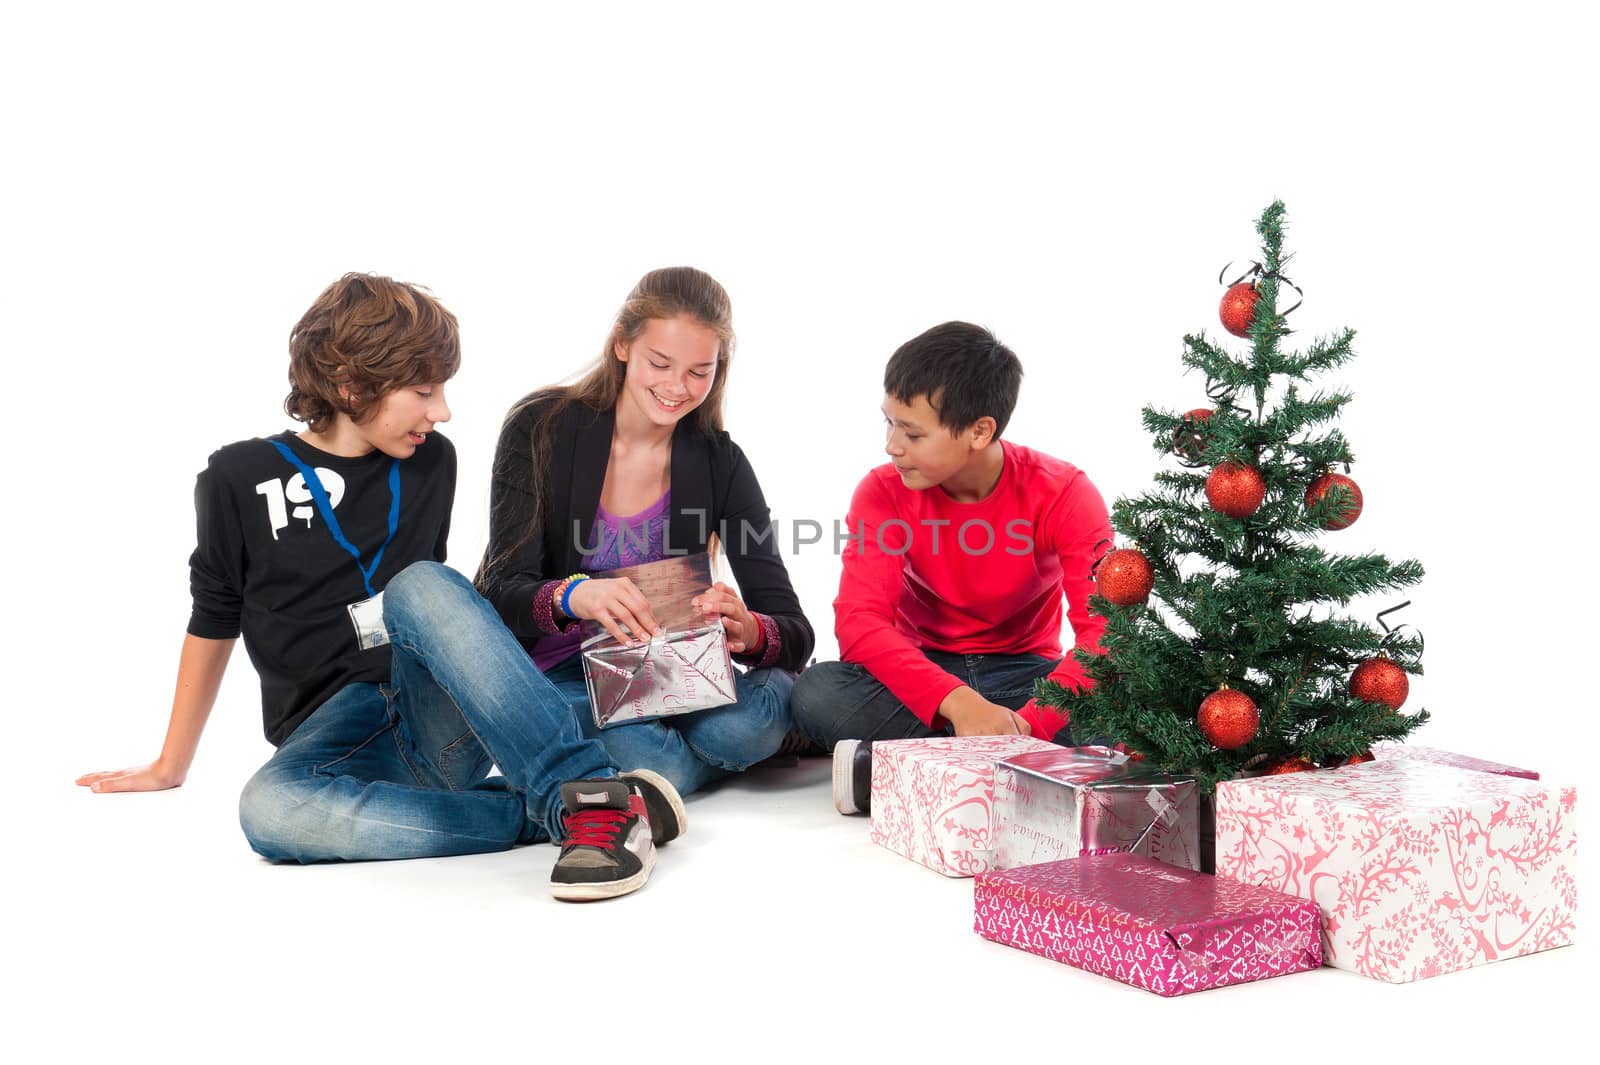 Two boys and a girl, celebrating Christmas on a white background